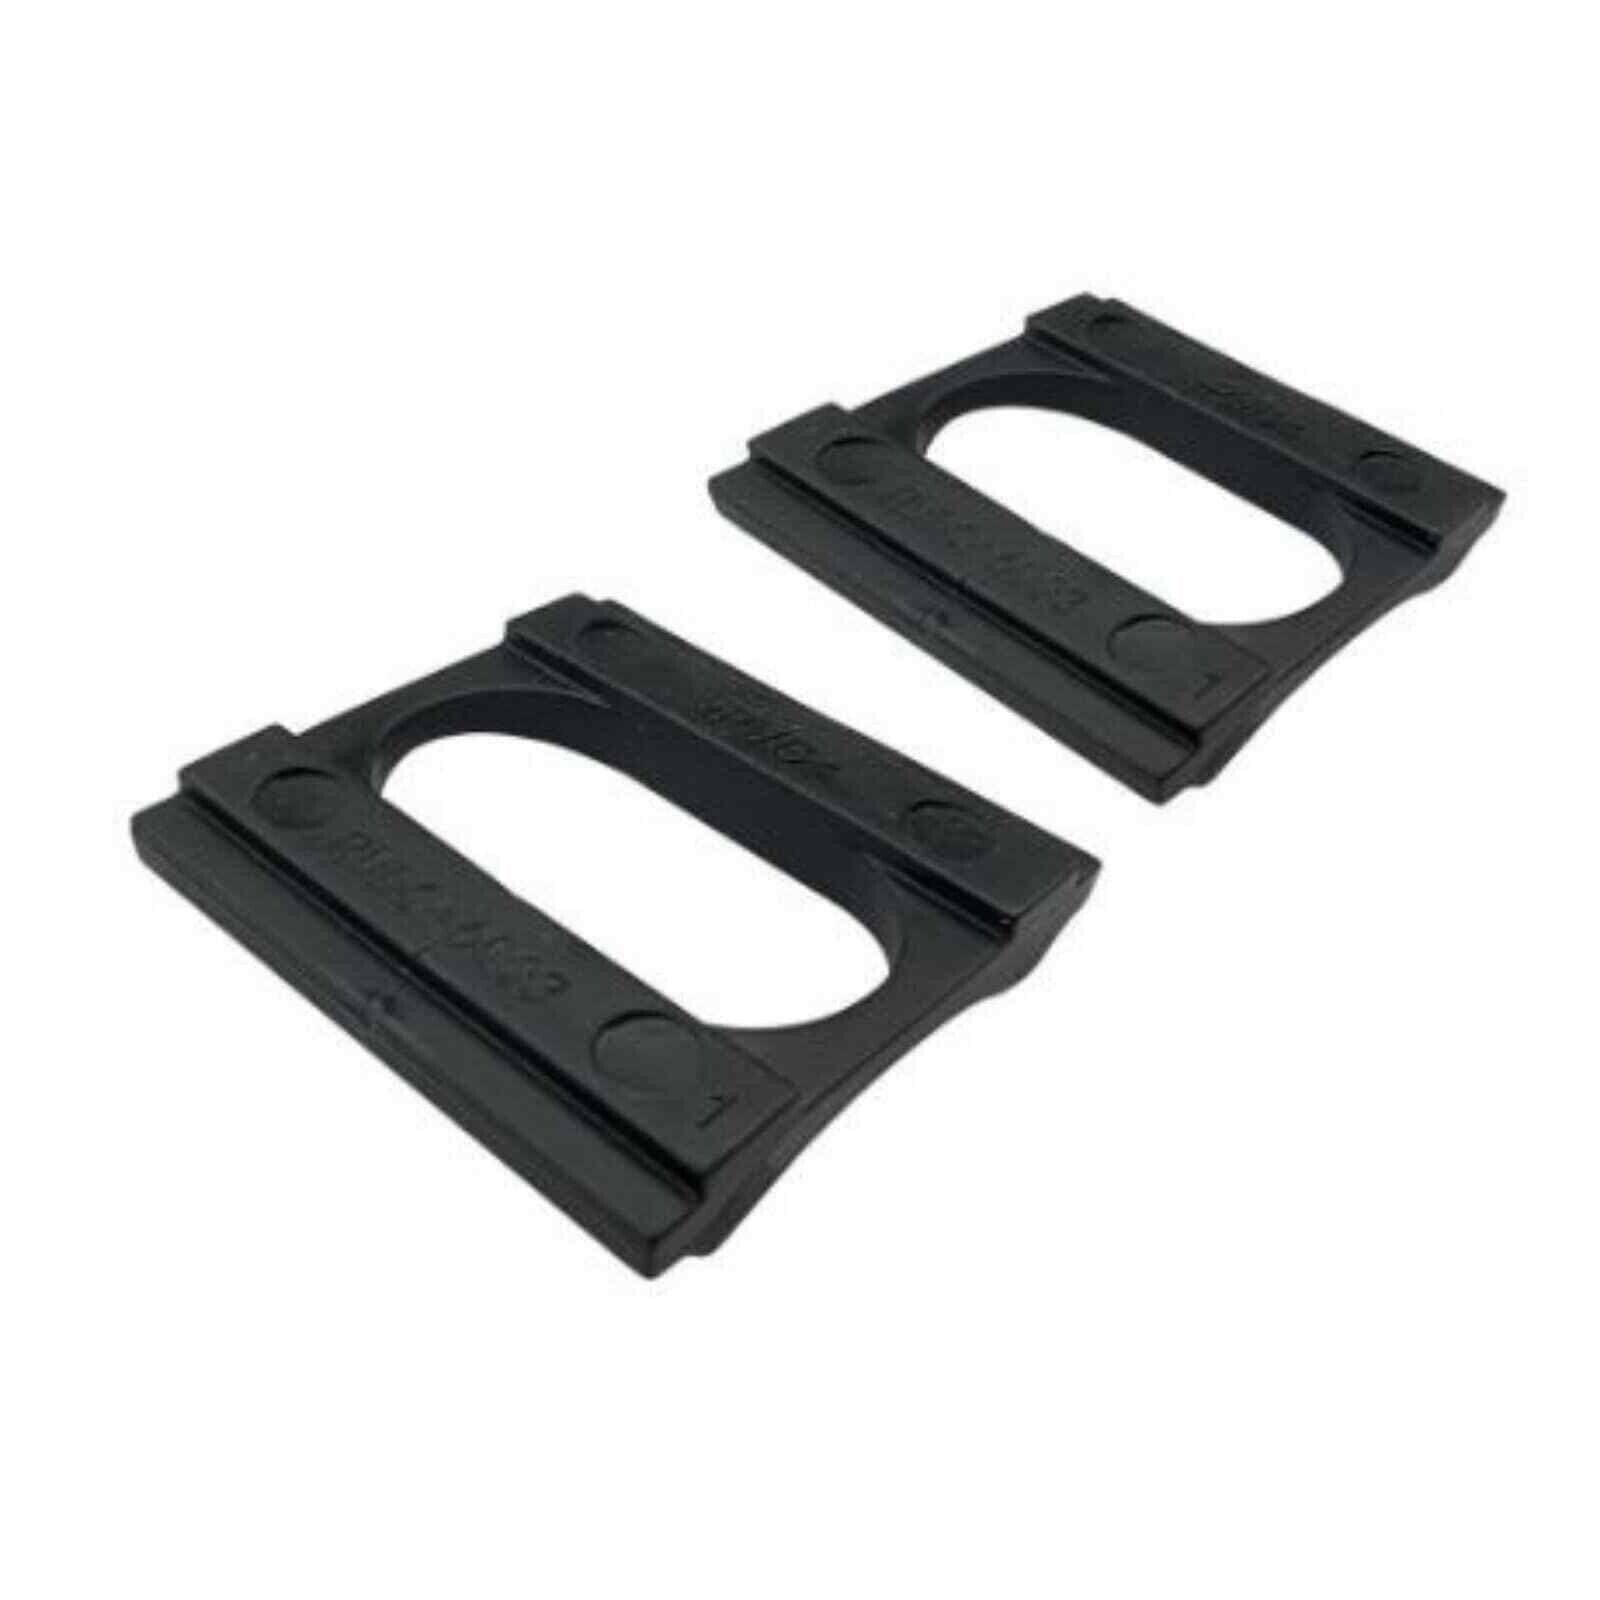 EBike Battery Down tube Mounting Plate Bracket holder Base for Electric Bicycle - TDRMOTO